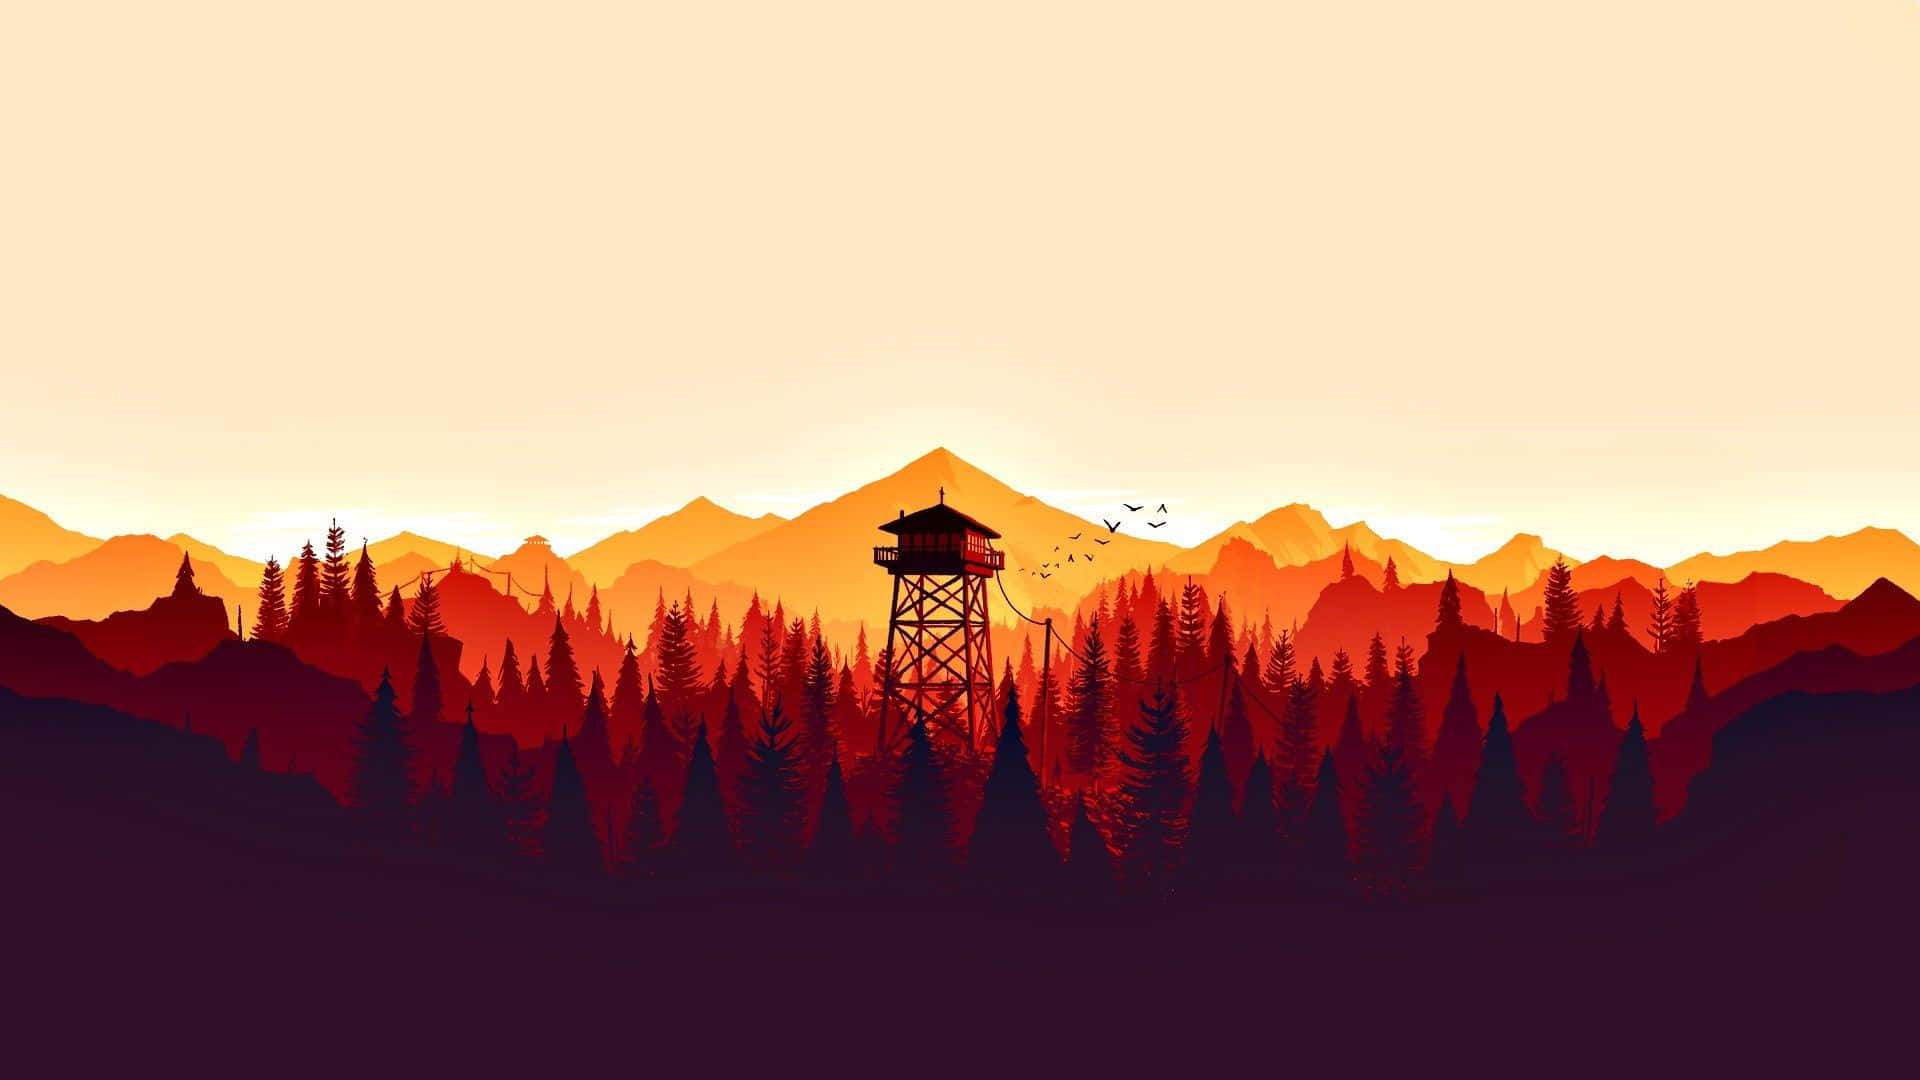 The Firewatch Tower surrounded by a mysterious forest